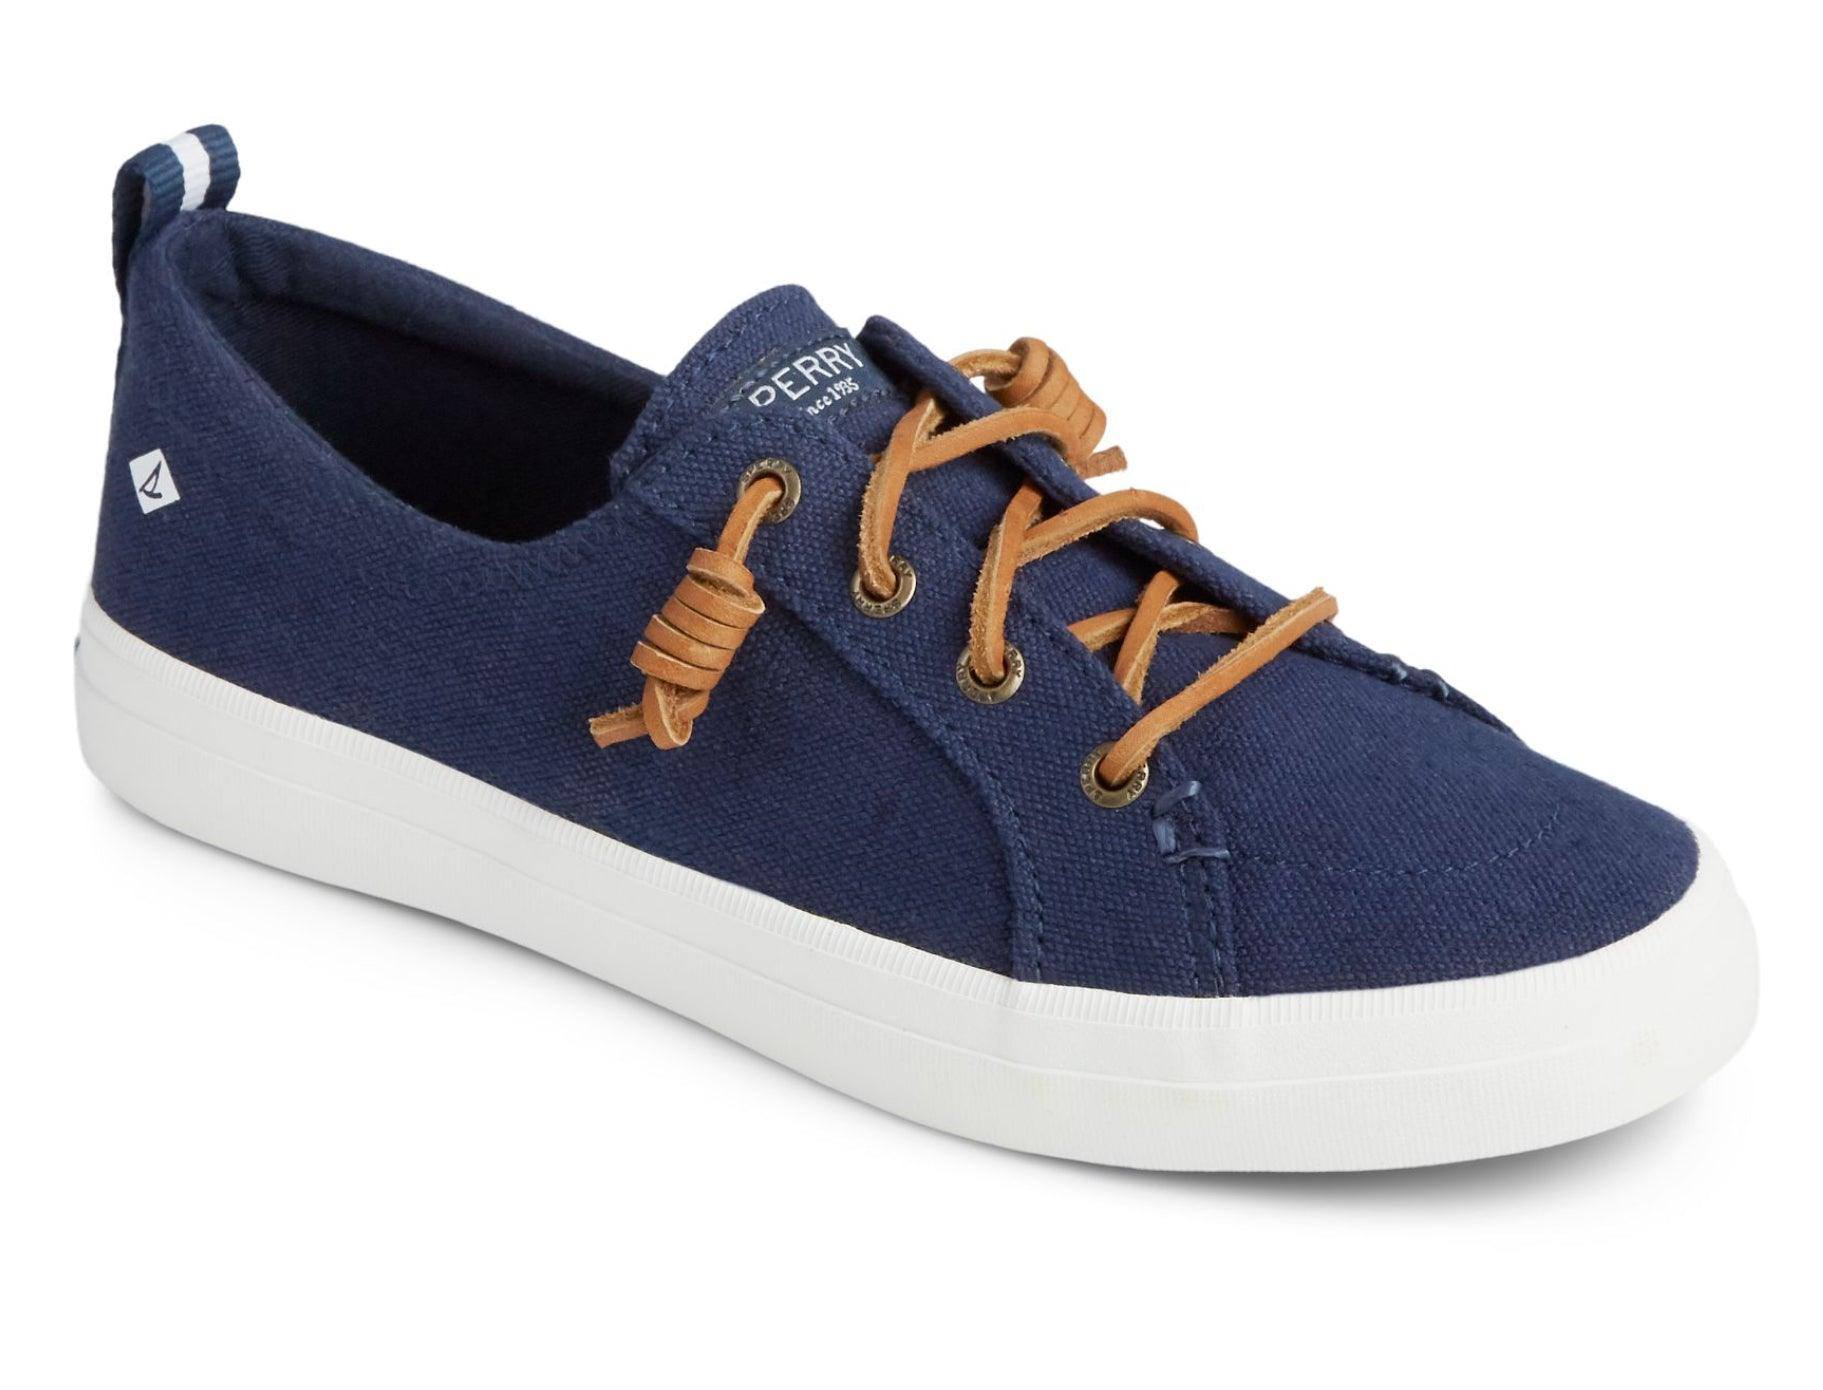 Crest Vibe Linen - The Shoe CollectiveSperry